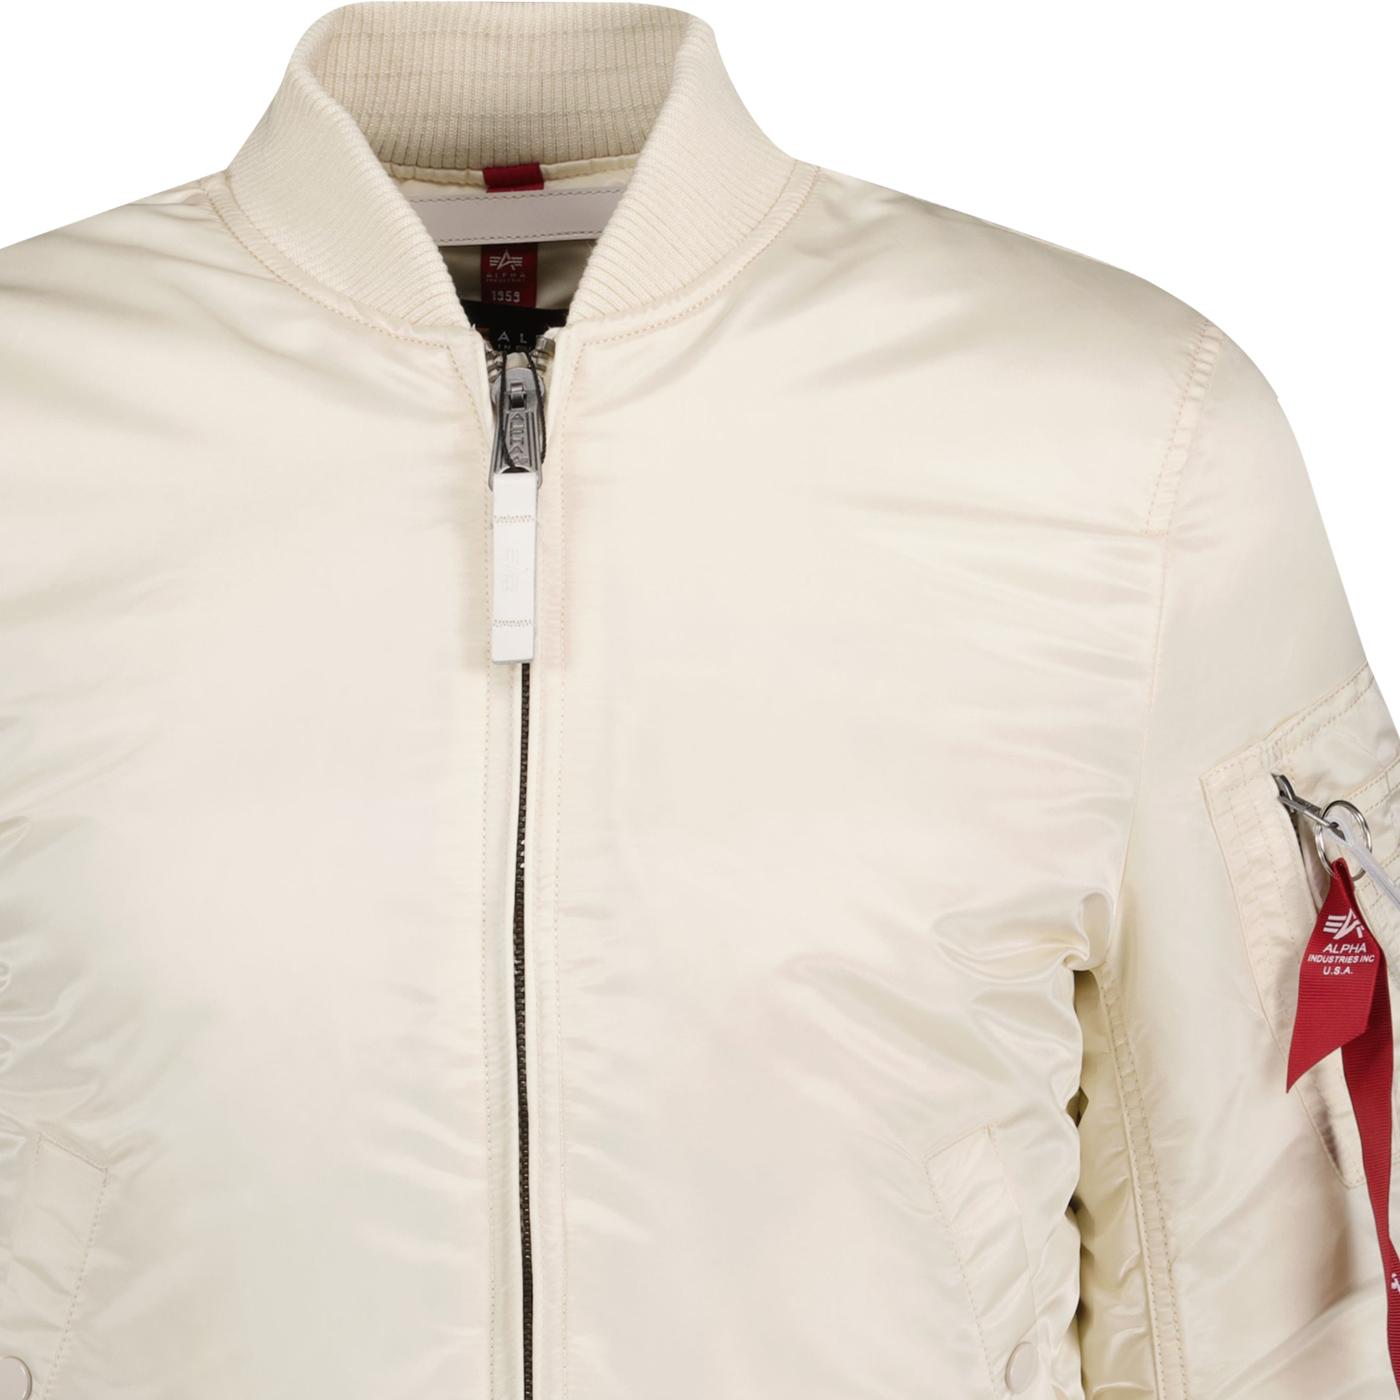 Industries White Stream Jacket ALPHA VF Mod Bomber MA1 in